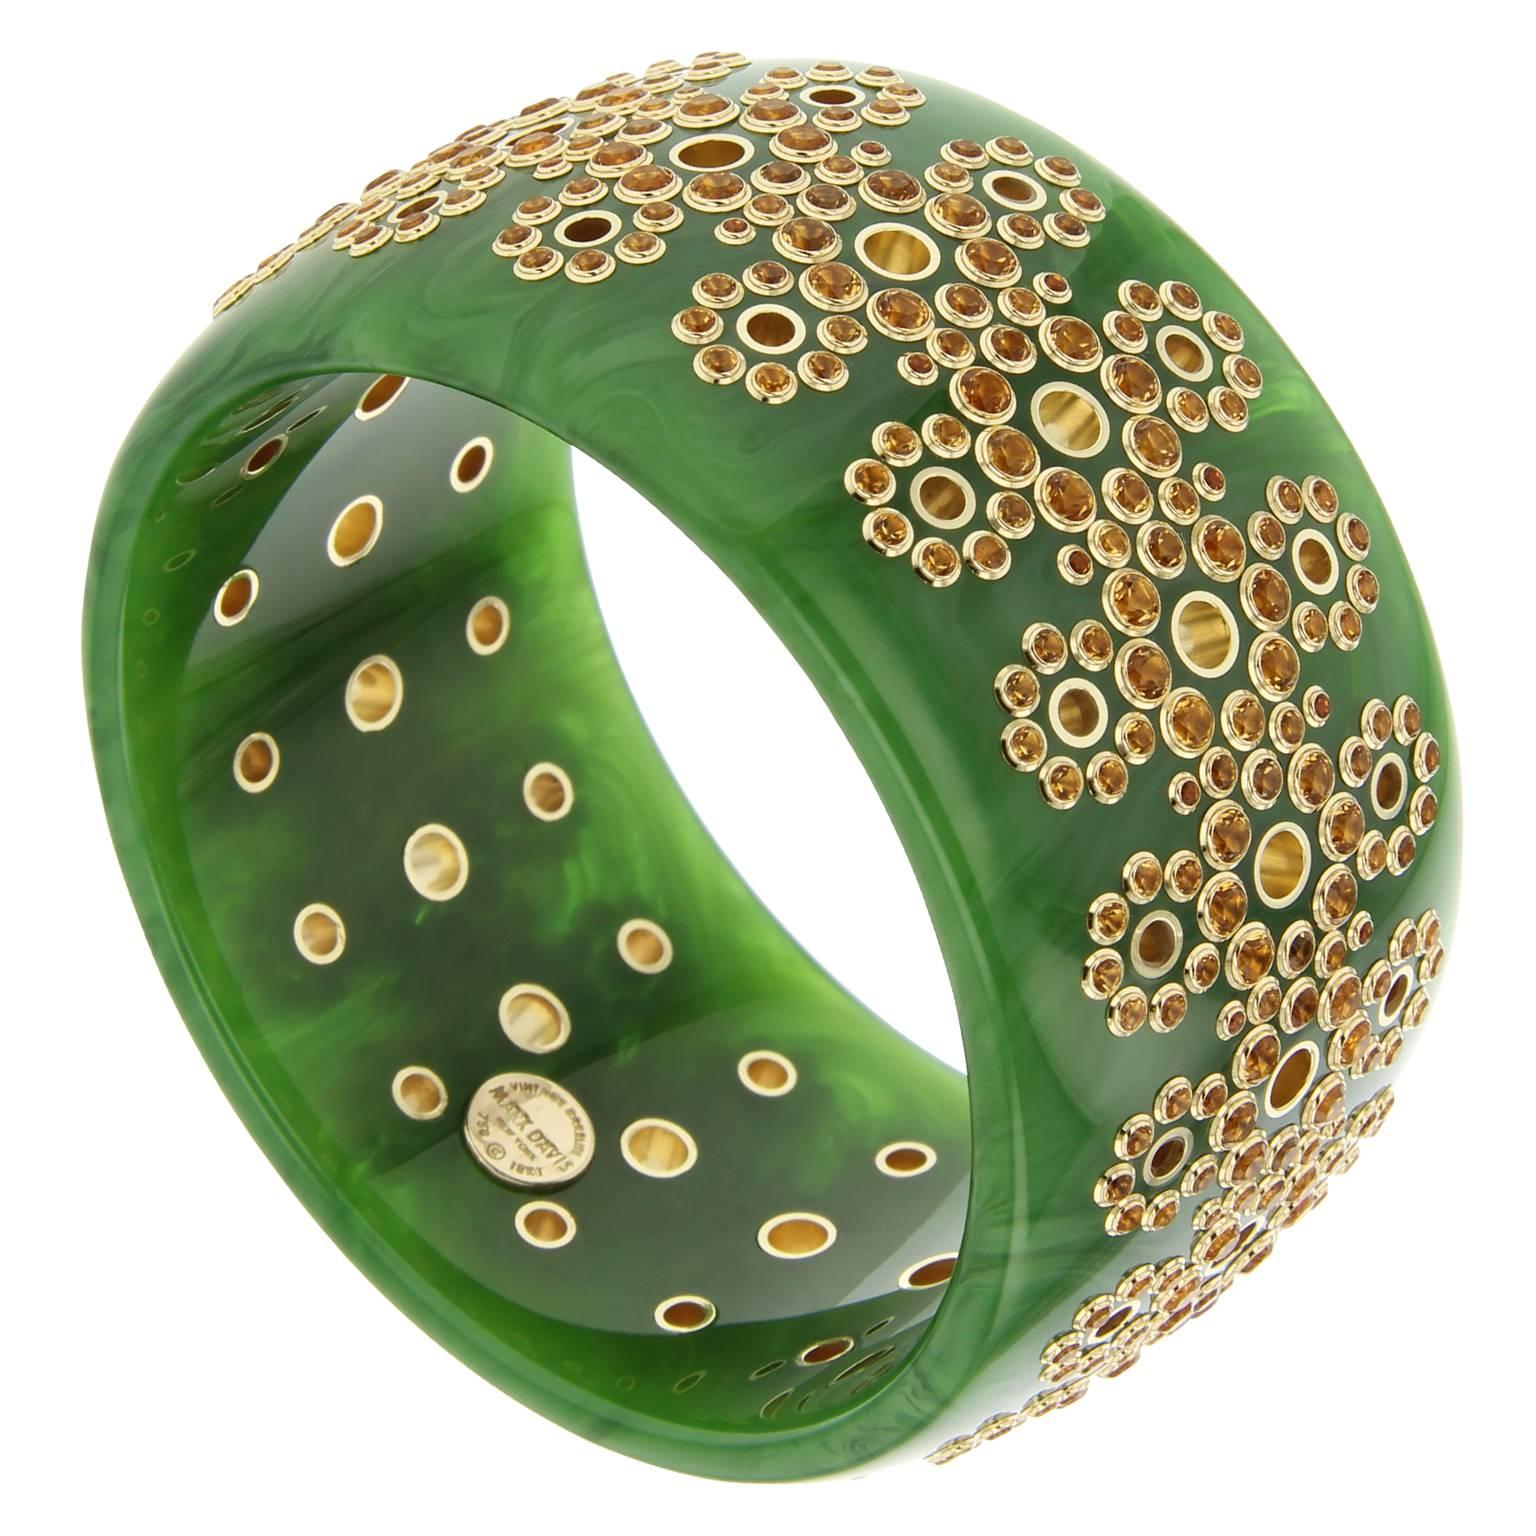 This spectacular Mark Davis bangle was handcrafted from richly marbled green vintage bakelite. The bangle is pierced with 18k gold lined holes and studded with citrine bezel-set in 18k yellow gold. Requiring a tremendous amount of time and labor,